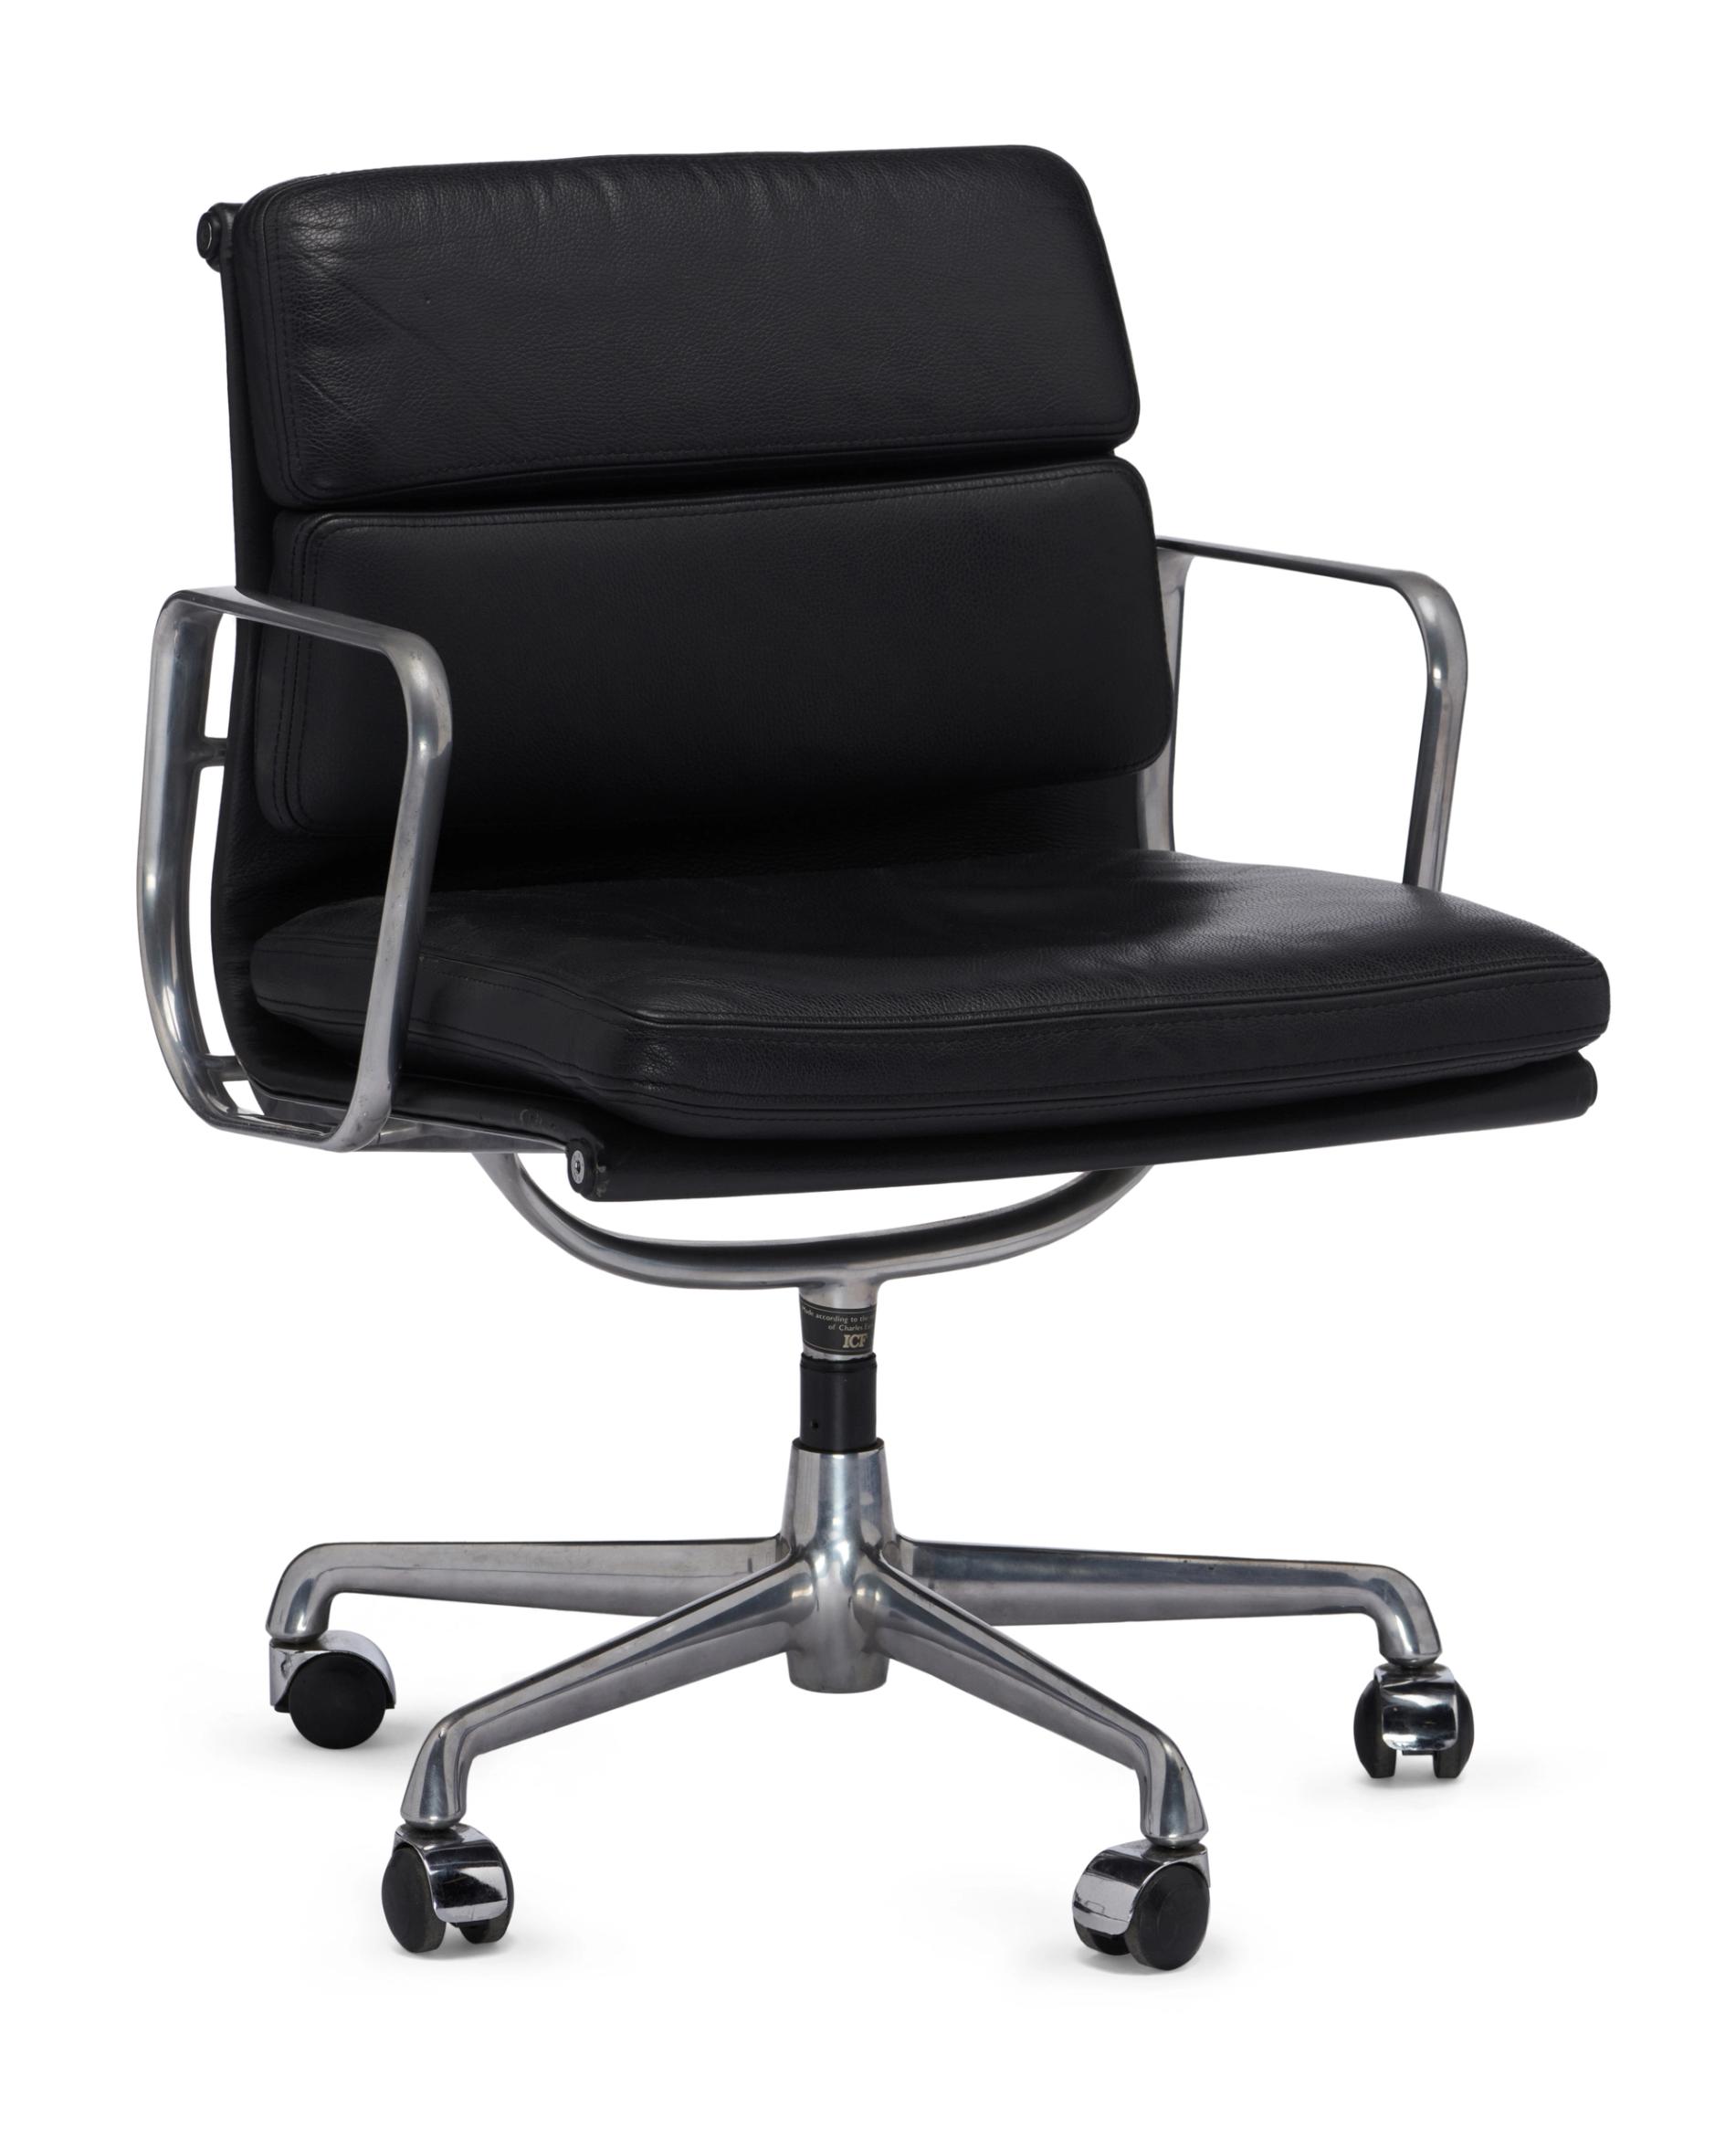 Original Edition Modernist Charles & Ray Eames, Soft Pad EA 217 Office Chair, 1970s